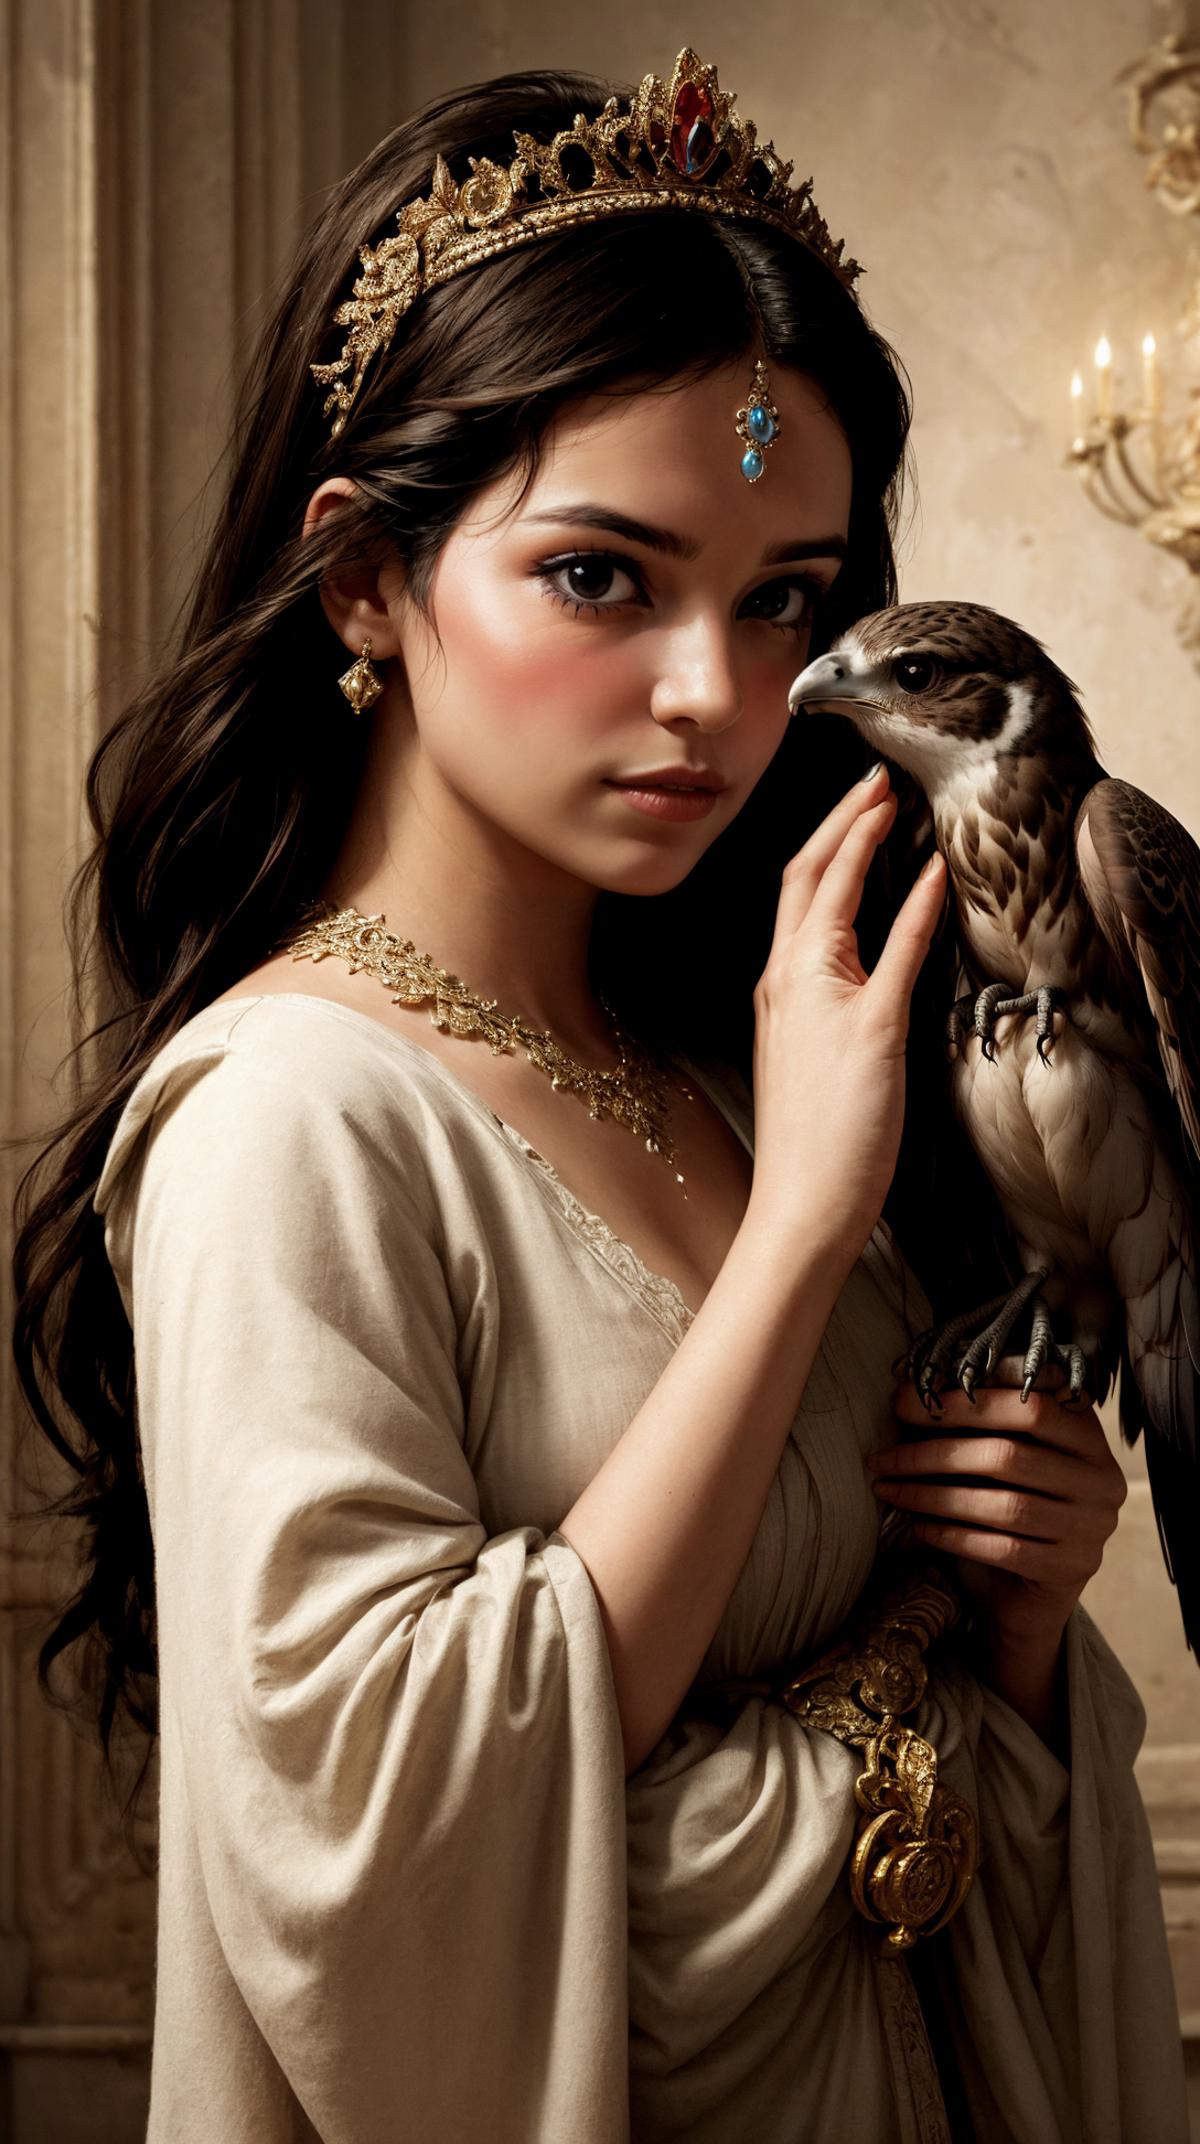 A woman in a white dress holding a bird of prey, possibly an eagle, with a gold necklace around her neck.